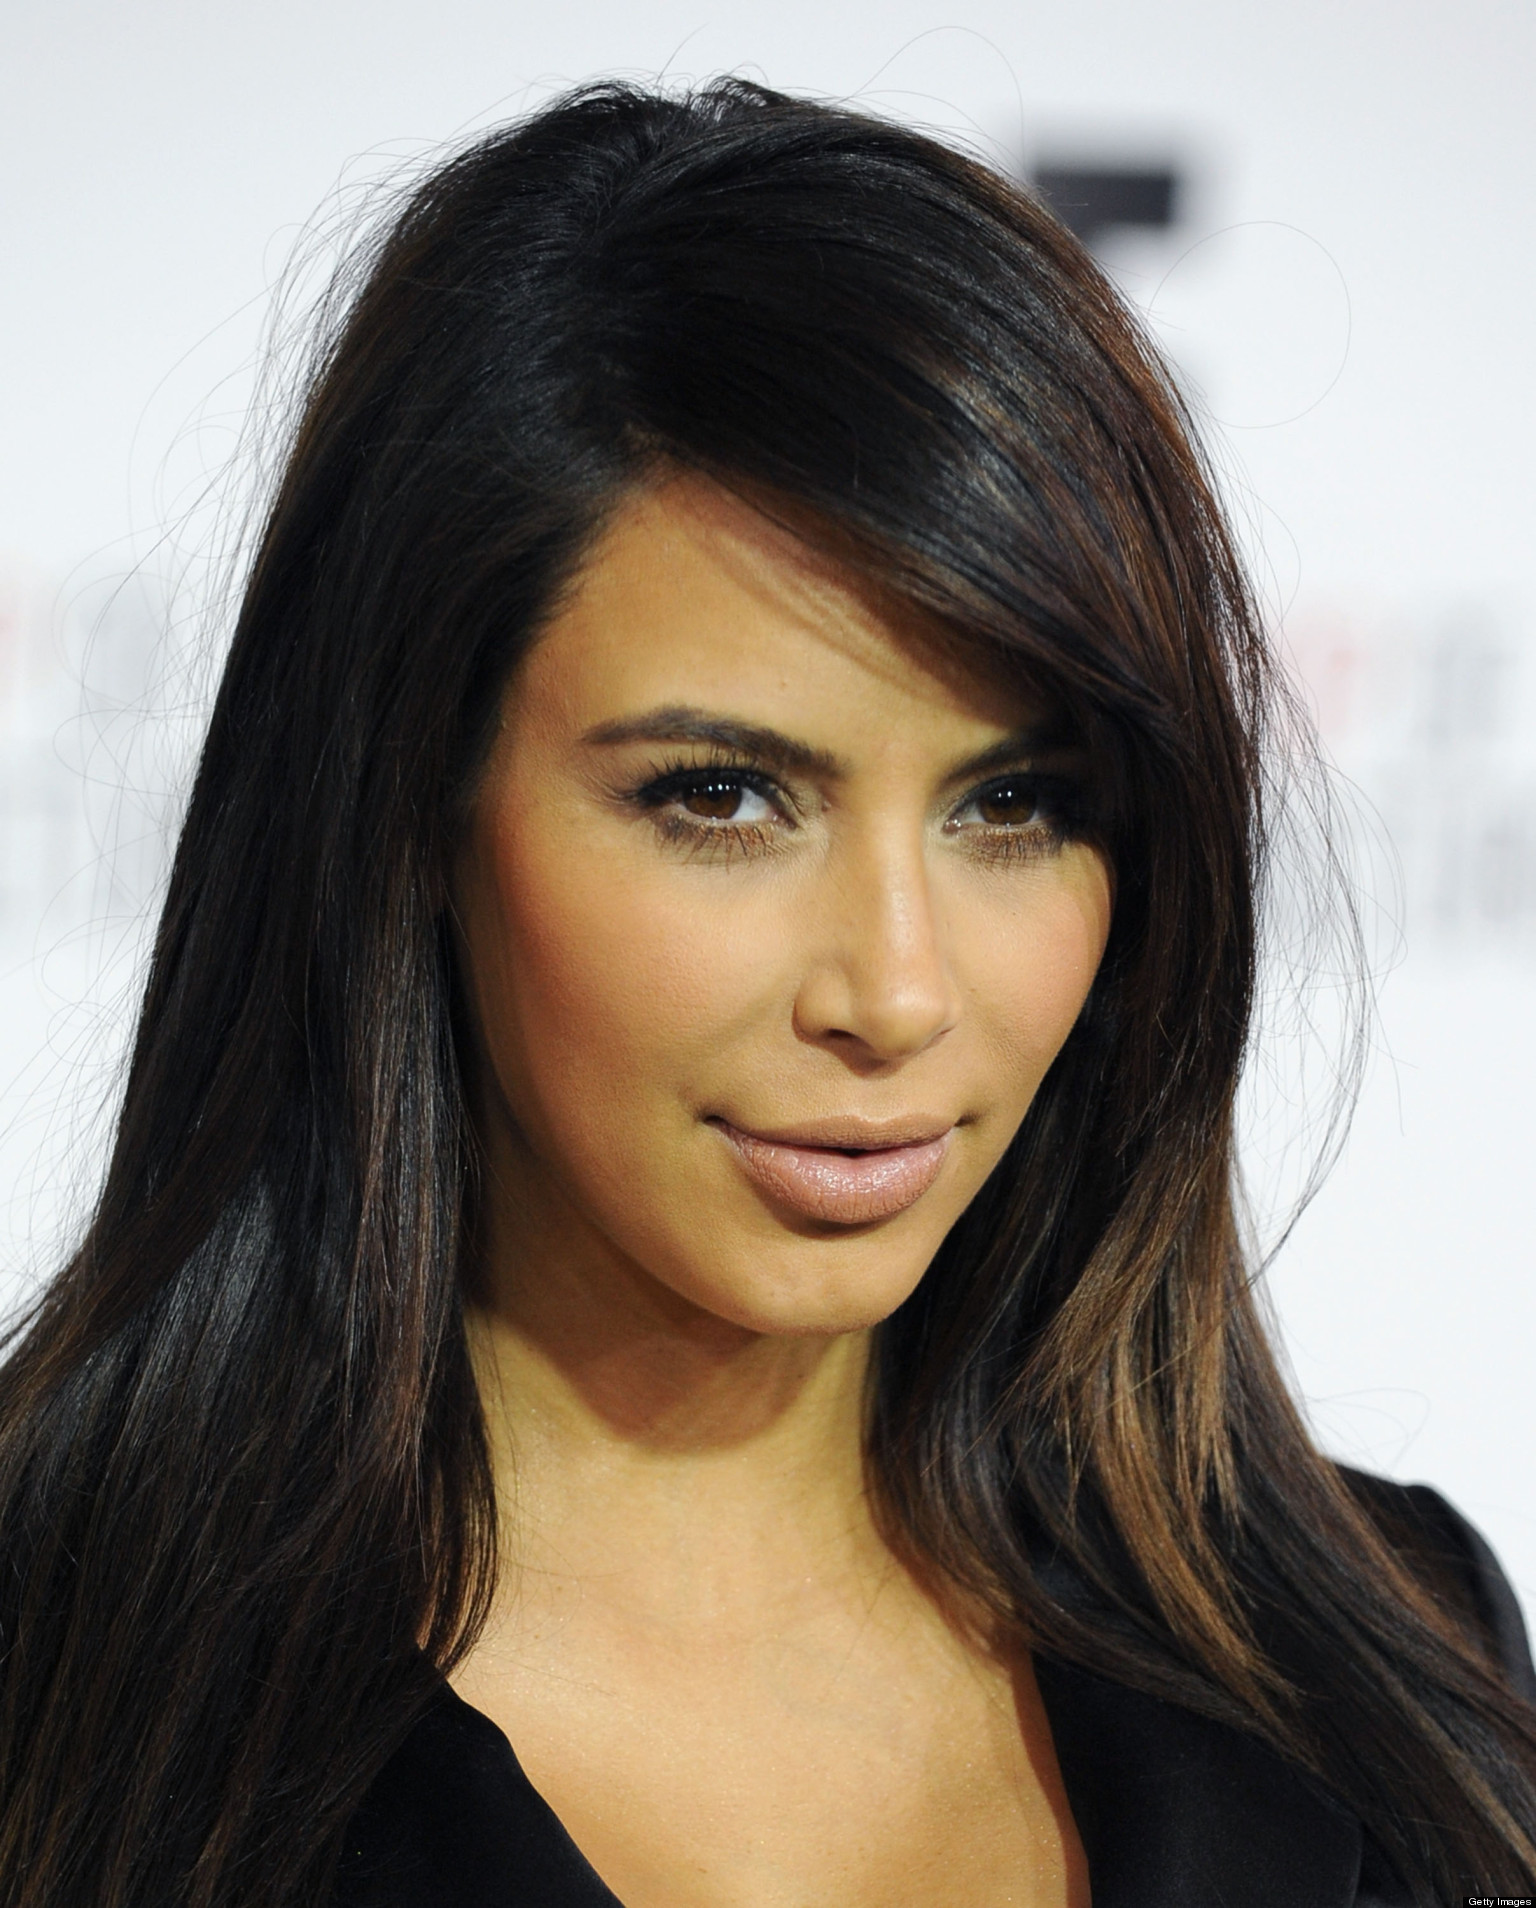 Kim Kardashian and Kris Humphries: Does Getting Even Pay Off? | HuffPost